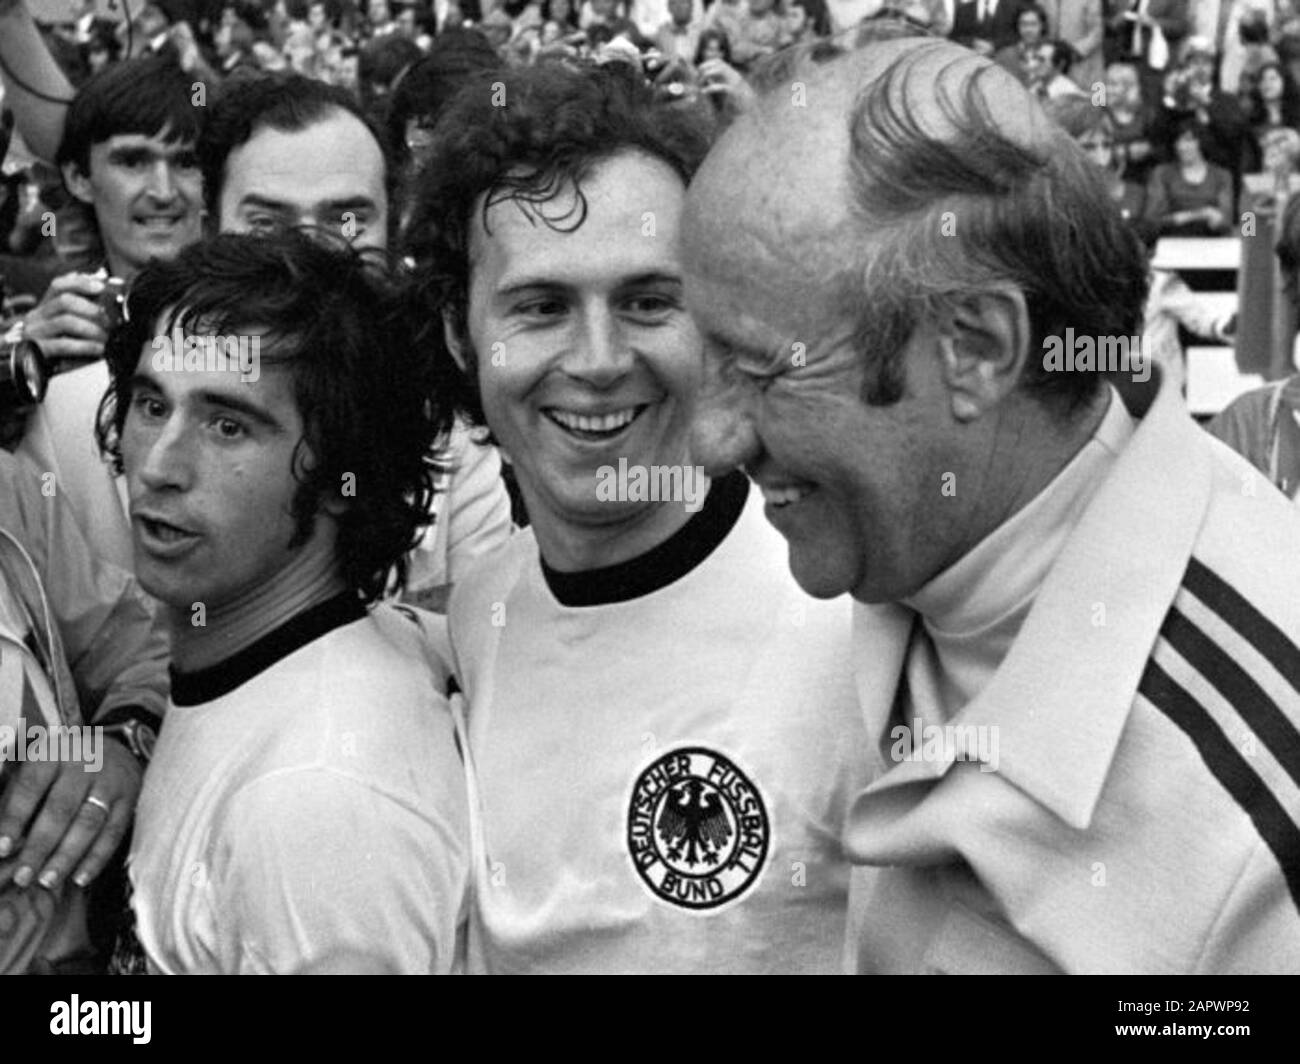 Final World Cup 1974 in Munich, West Germany against the Netherlands 2-1; v.l.n.r. Muller, Beckenbauer and trainer Schon afterwards.; Stock Photo